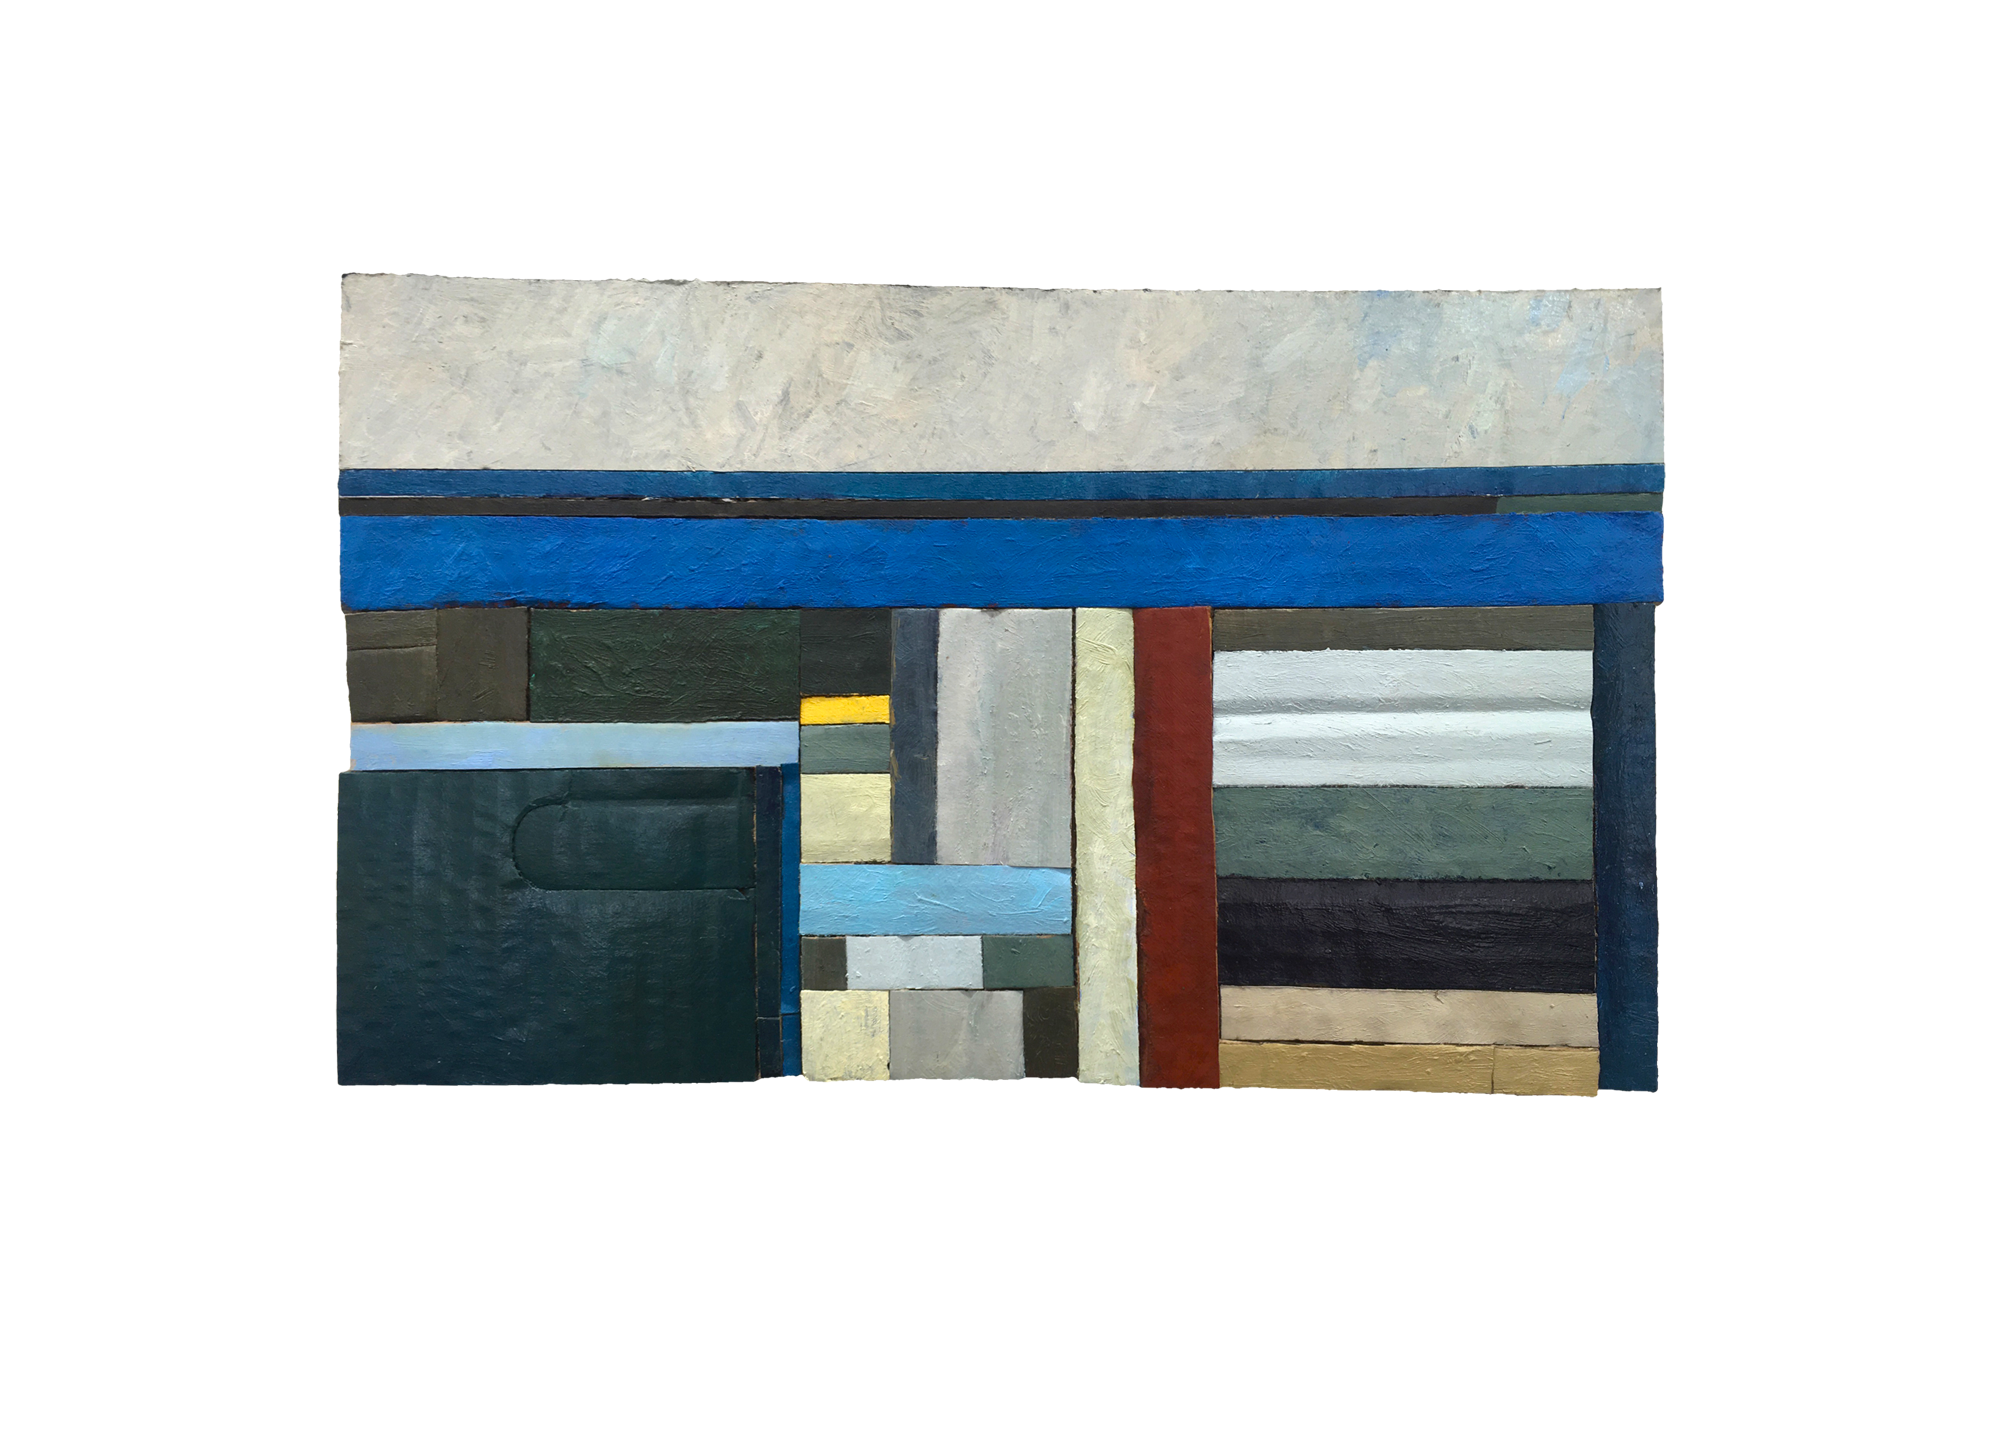  WEIR IN THE BARDO #10 (2019) oil on cardboard on MDF 38cm x 24cm Private collection. 